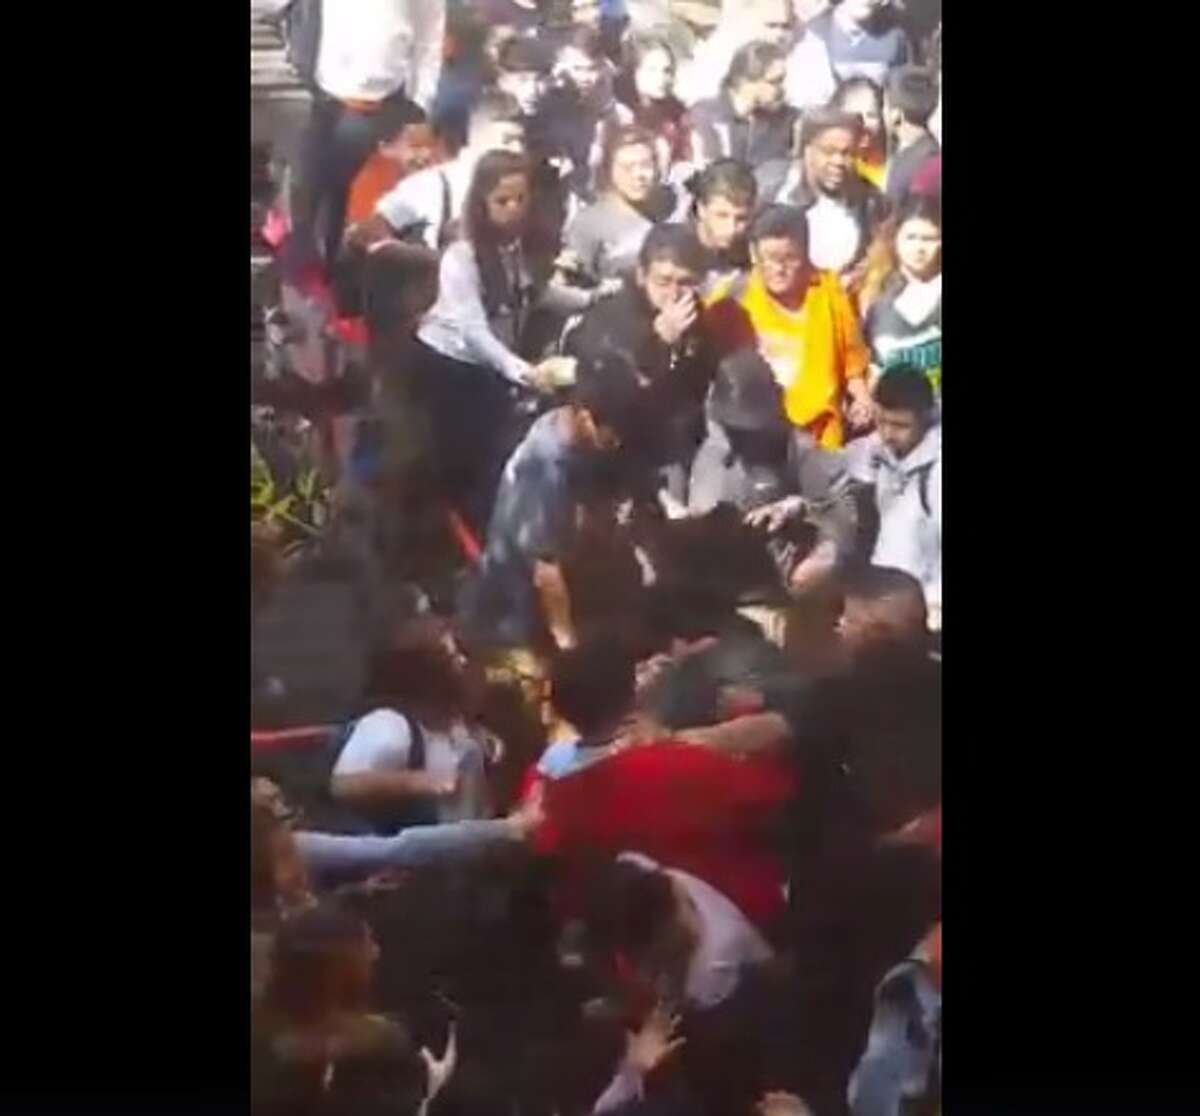 The Oct. 11, 2016 brawl at Burbank High School led to the arrest of nine students, according to district officials.